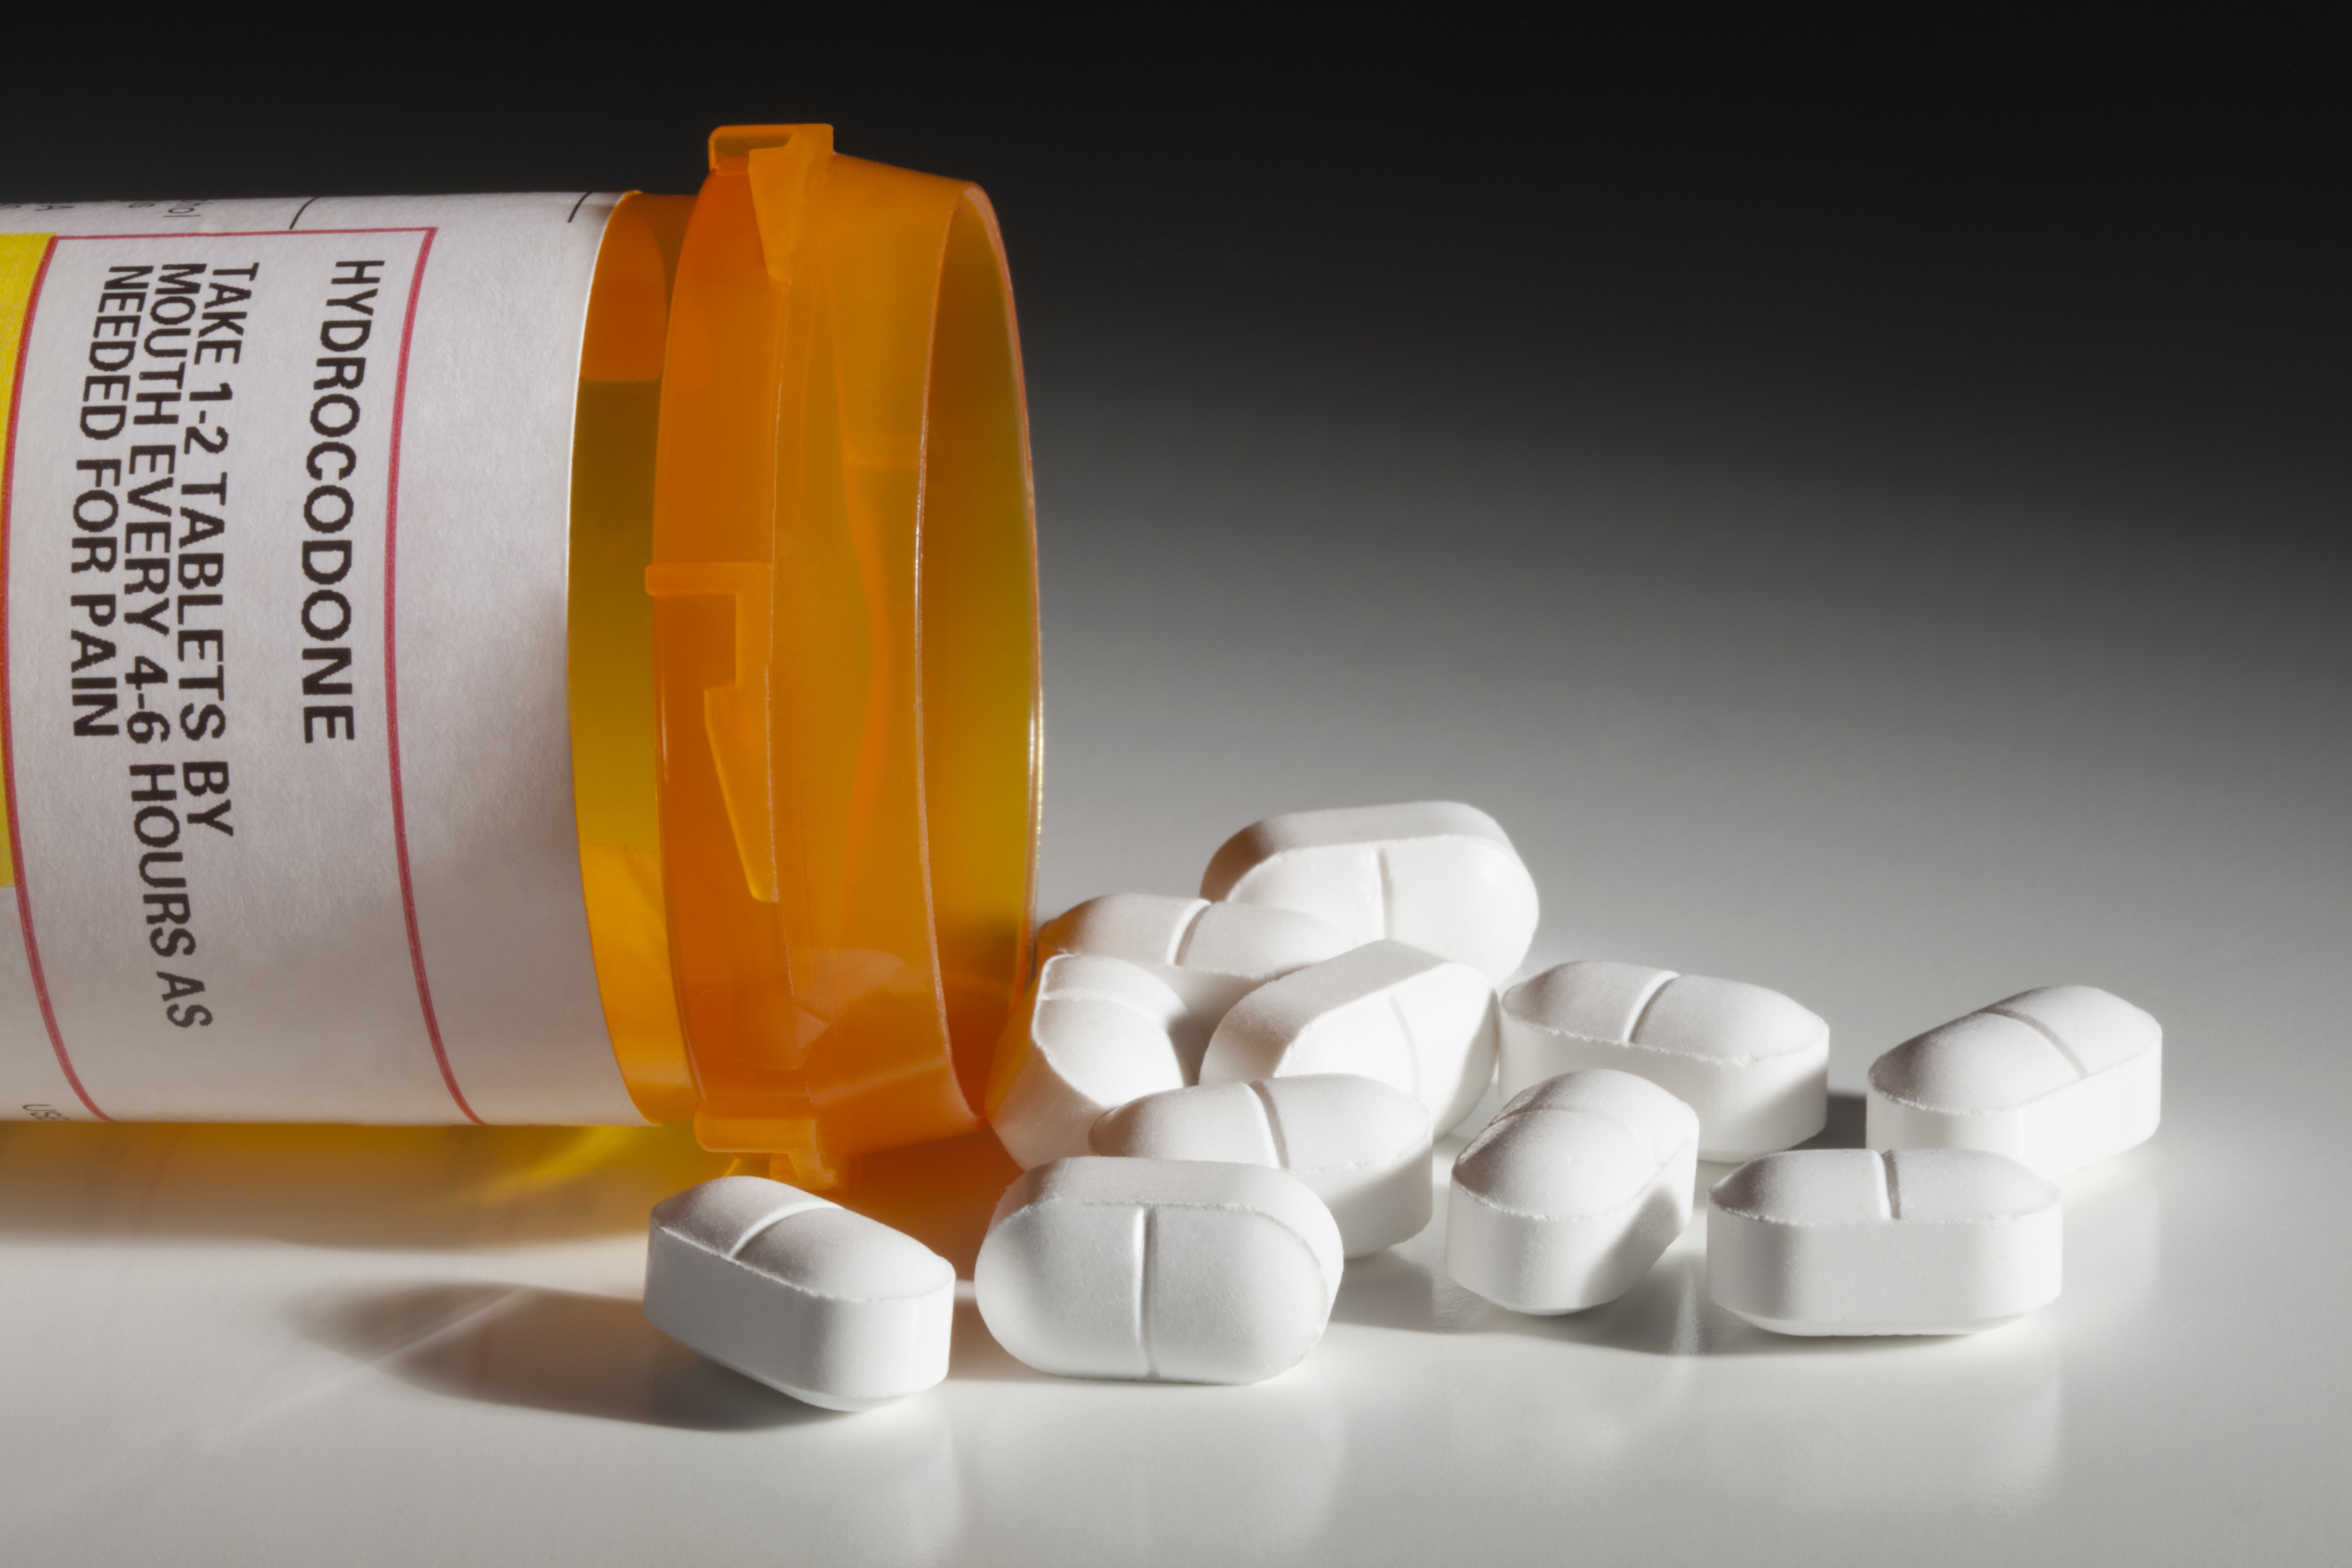 Pill bottle with spilled pills, photo by smartstock/Getty Images